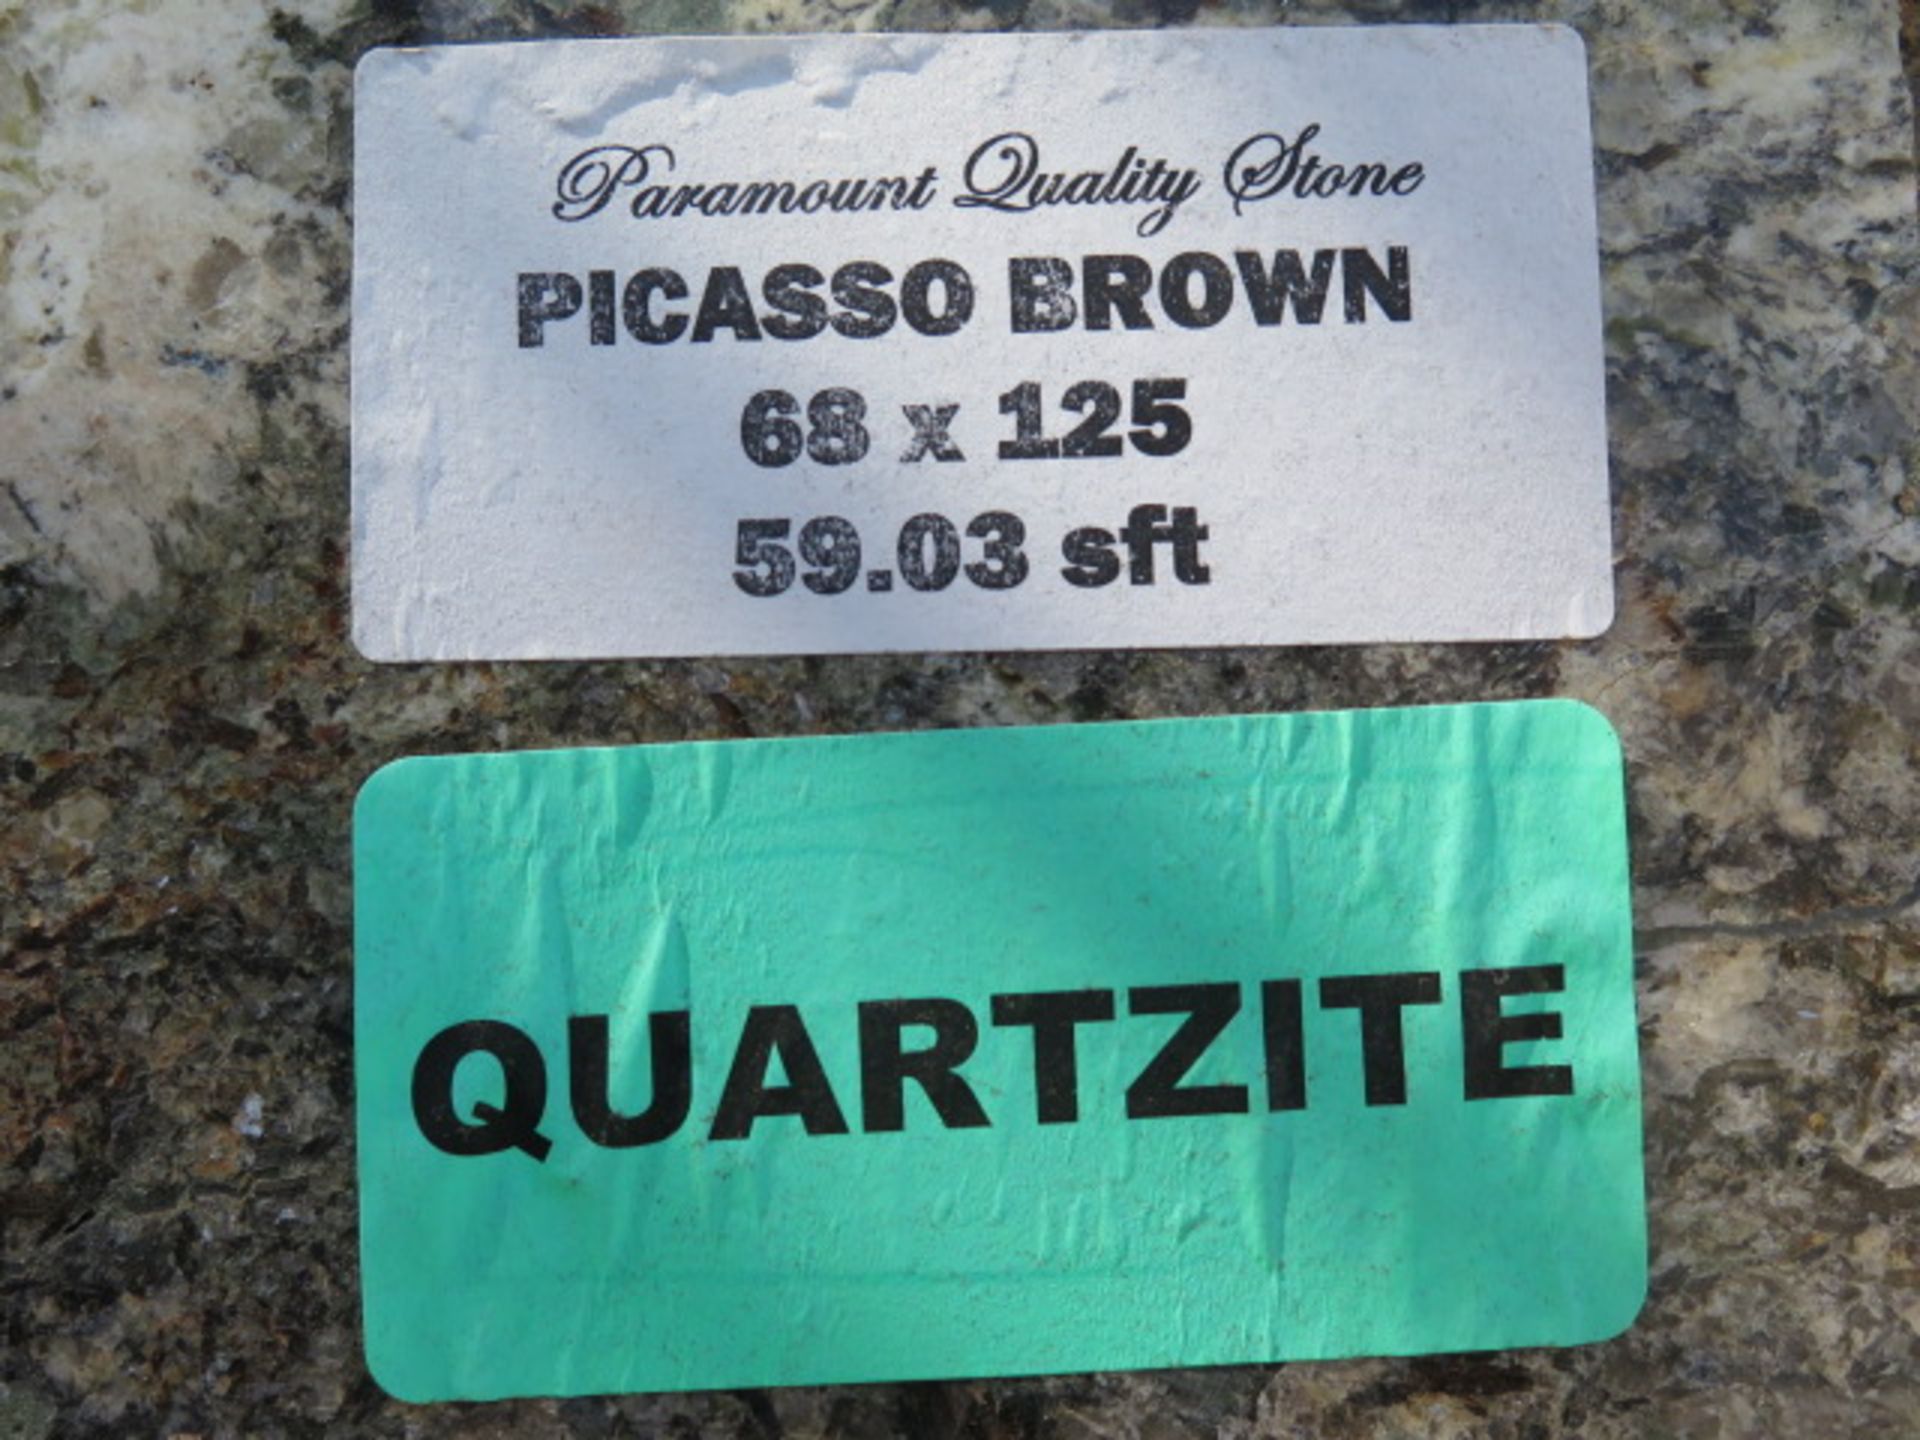 Picasso Brown Quartzite (4 Slabs) (SOLD AS-IS - NO WARRANTY) - Image 7 of 7